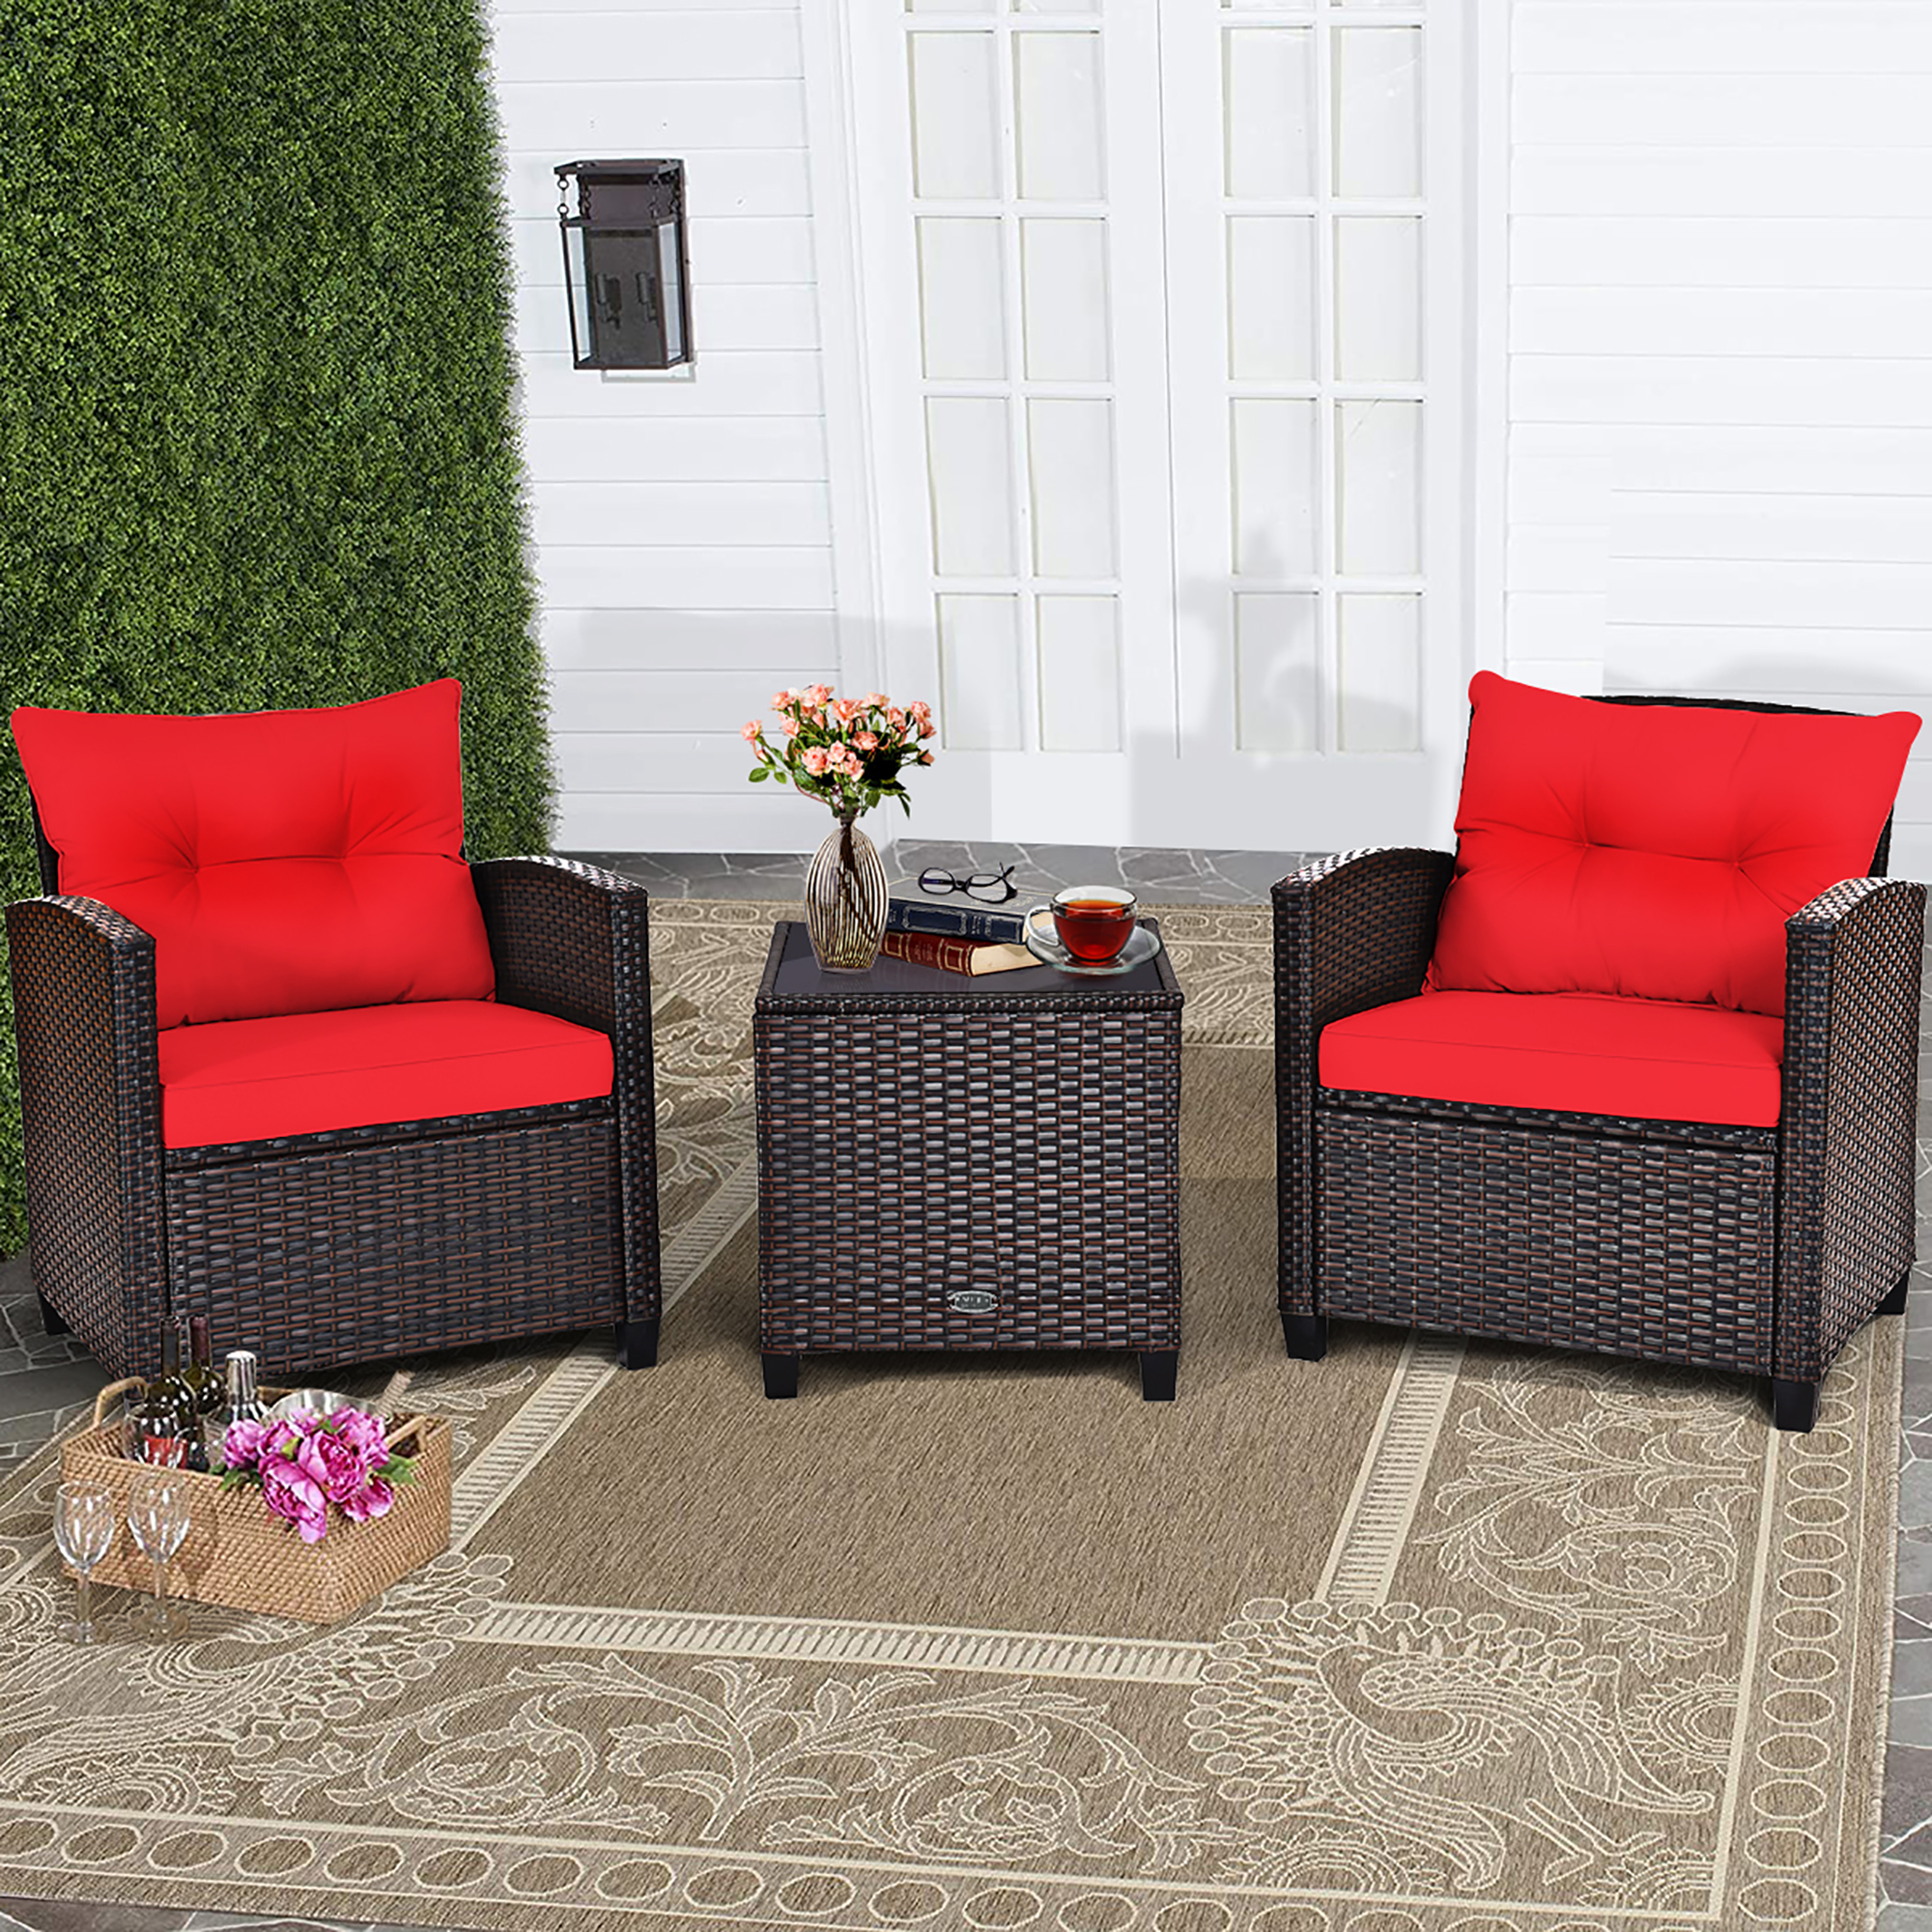 Costway 3PCS Patio Rattan Furniture Set Cushioned Conversation Set Sofa Coffee Table Red - image 1 of 10